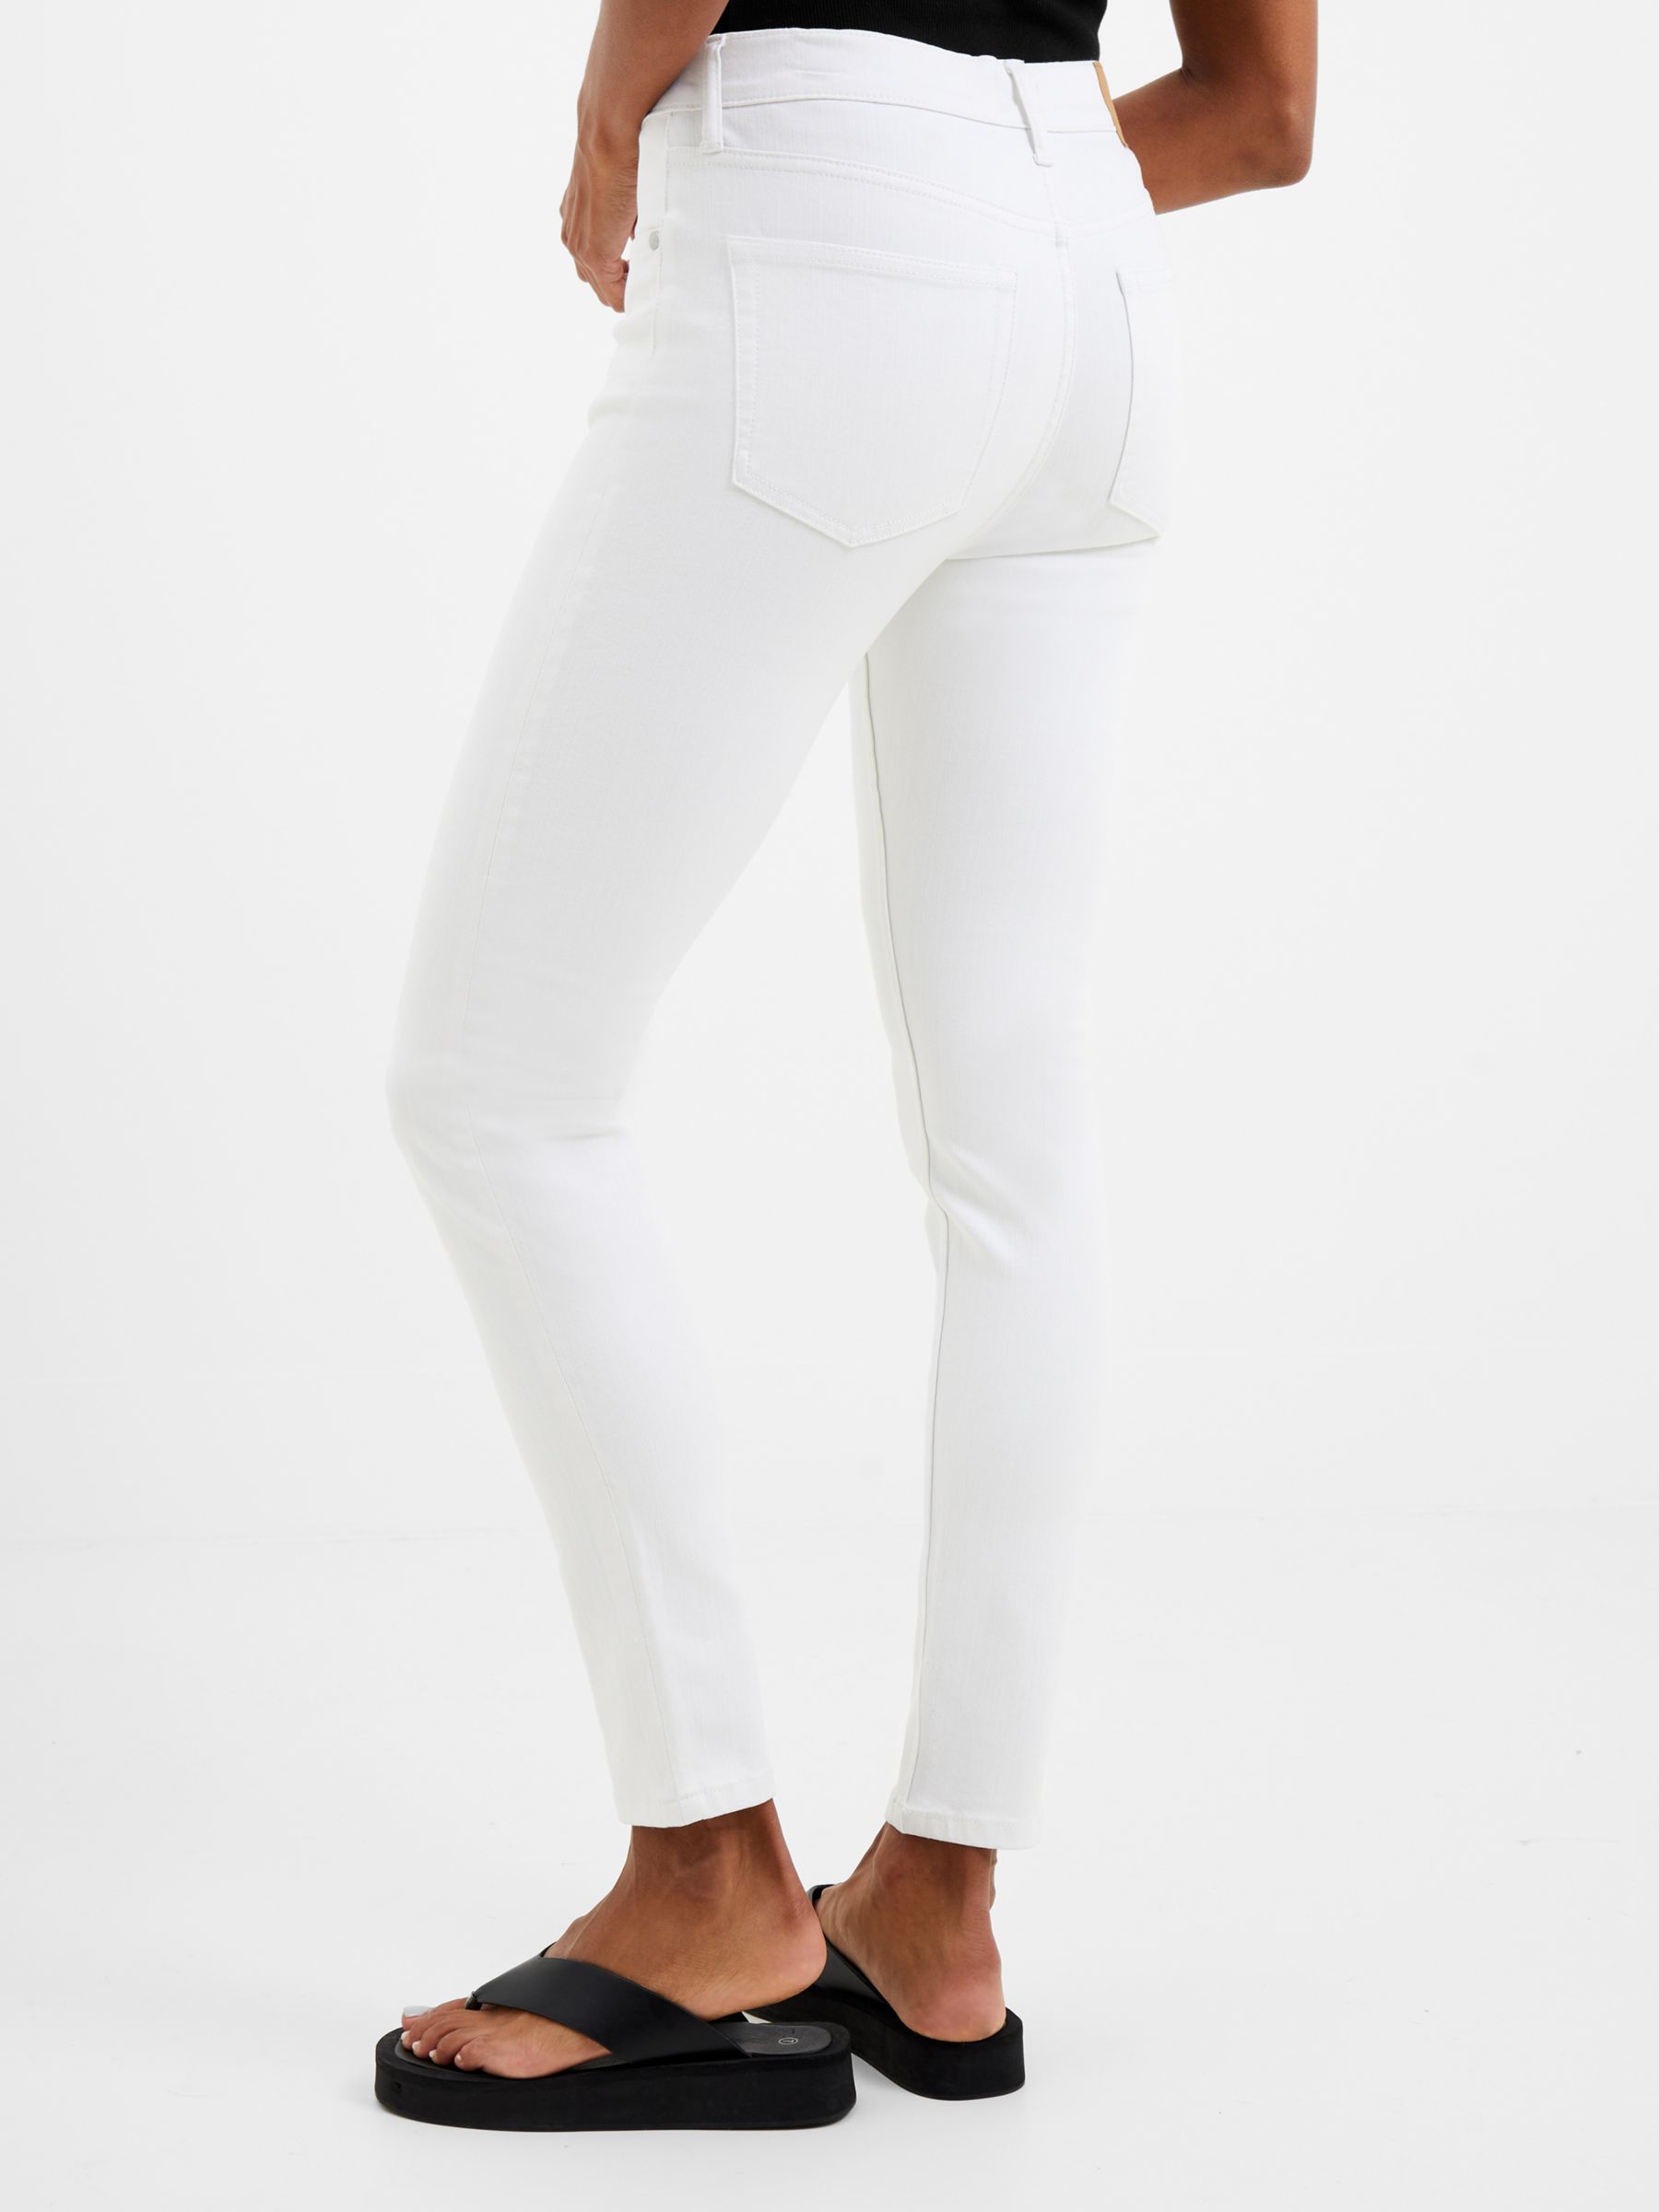 French Connection Rebound Skinny Jeans, White at John Lewis & Partners